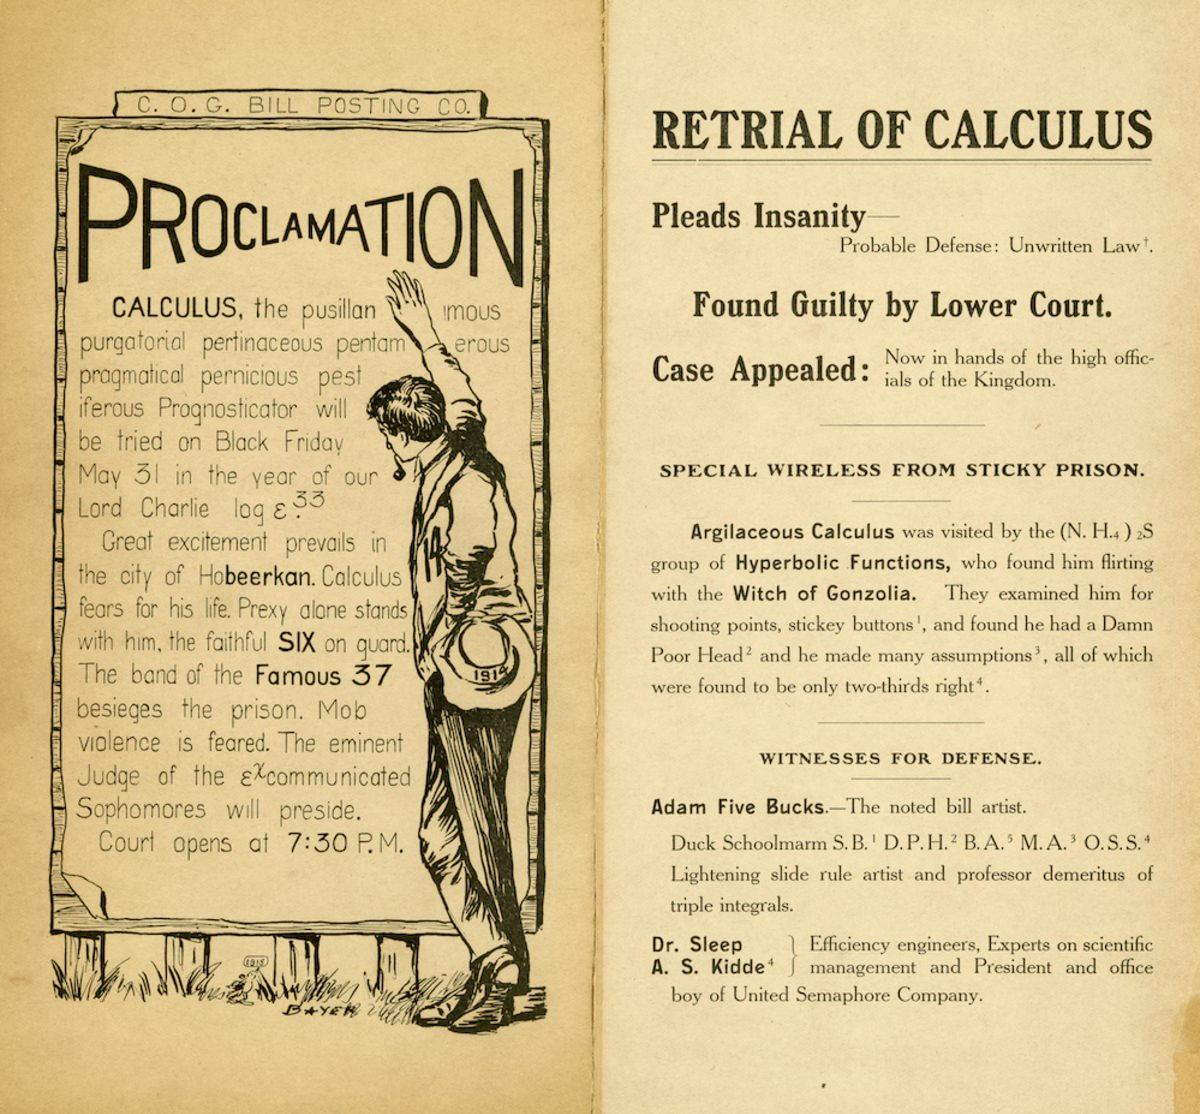 Calculus Cremation, 1888 to the late 1960s